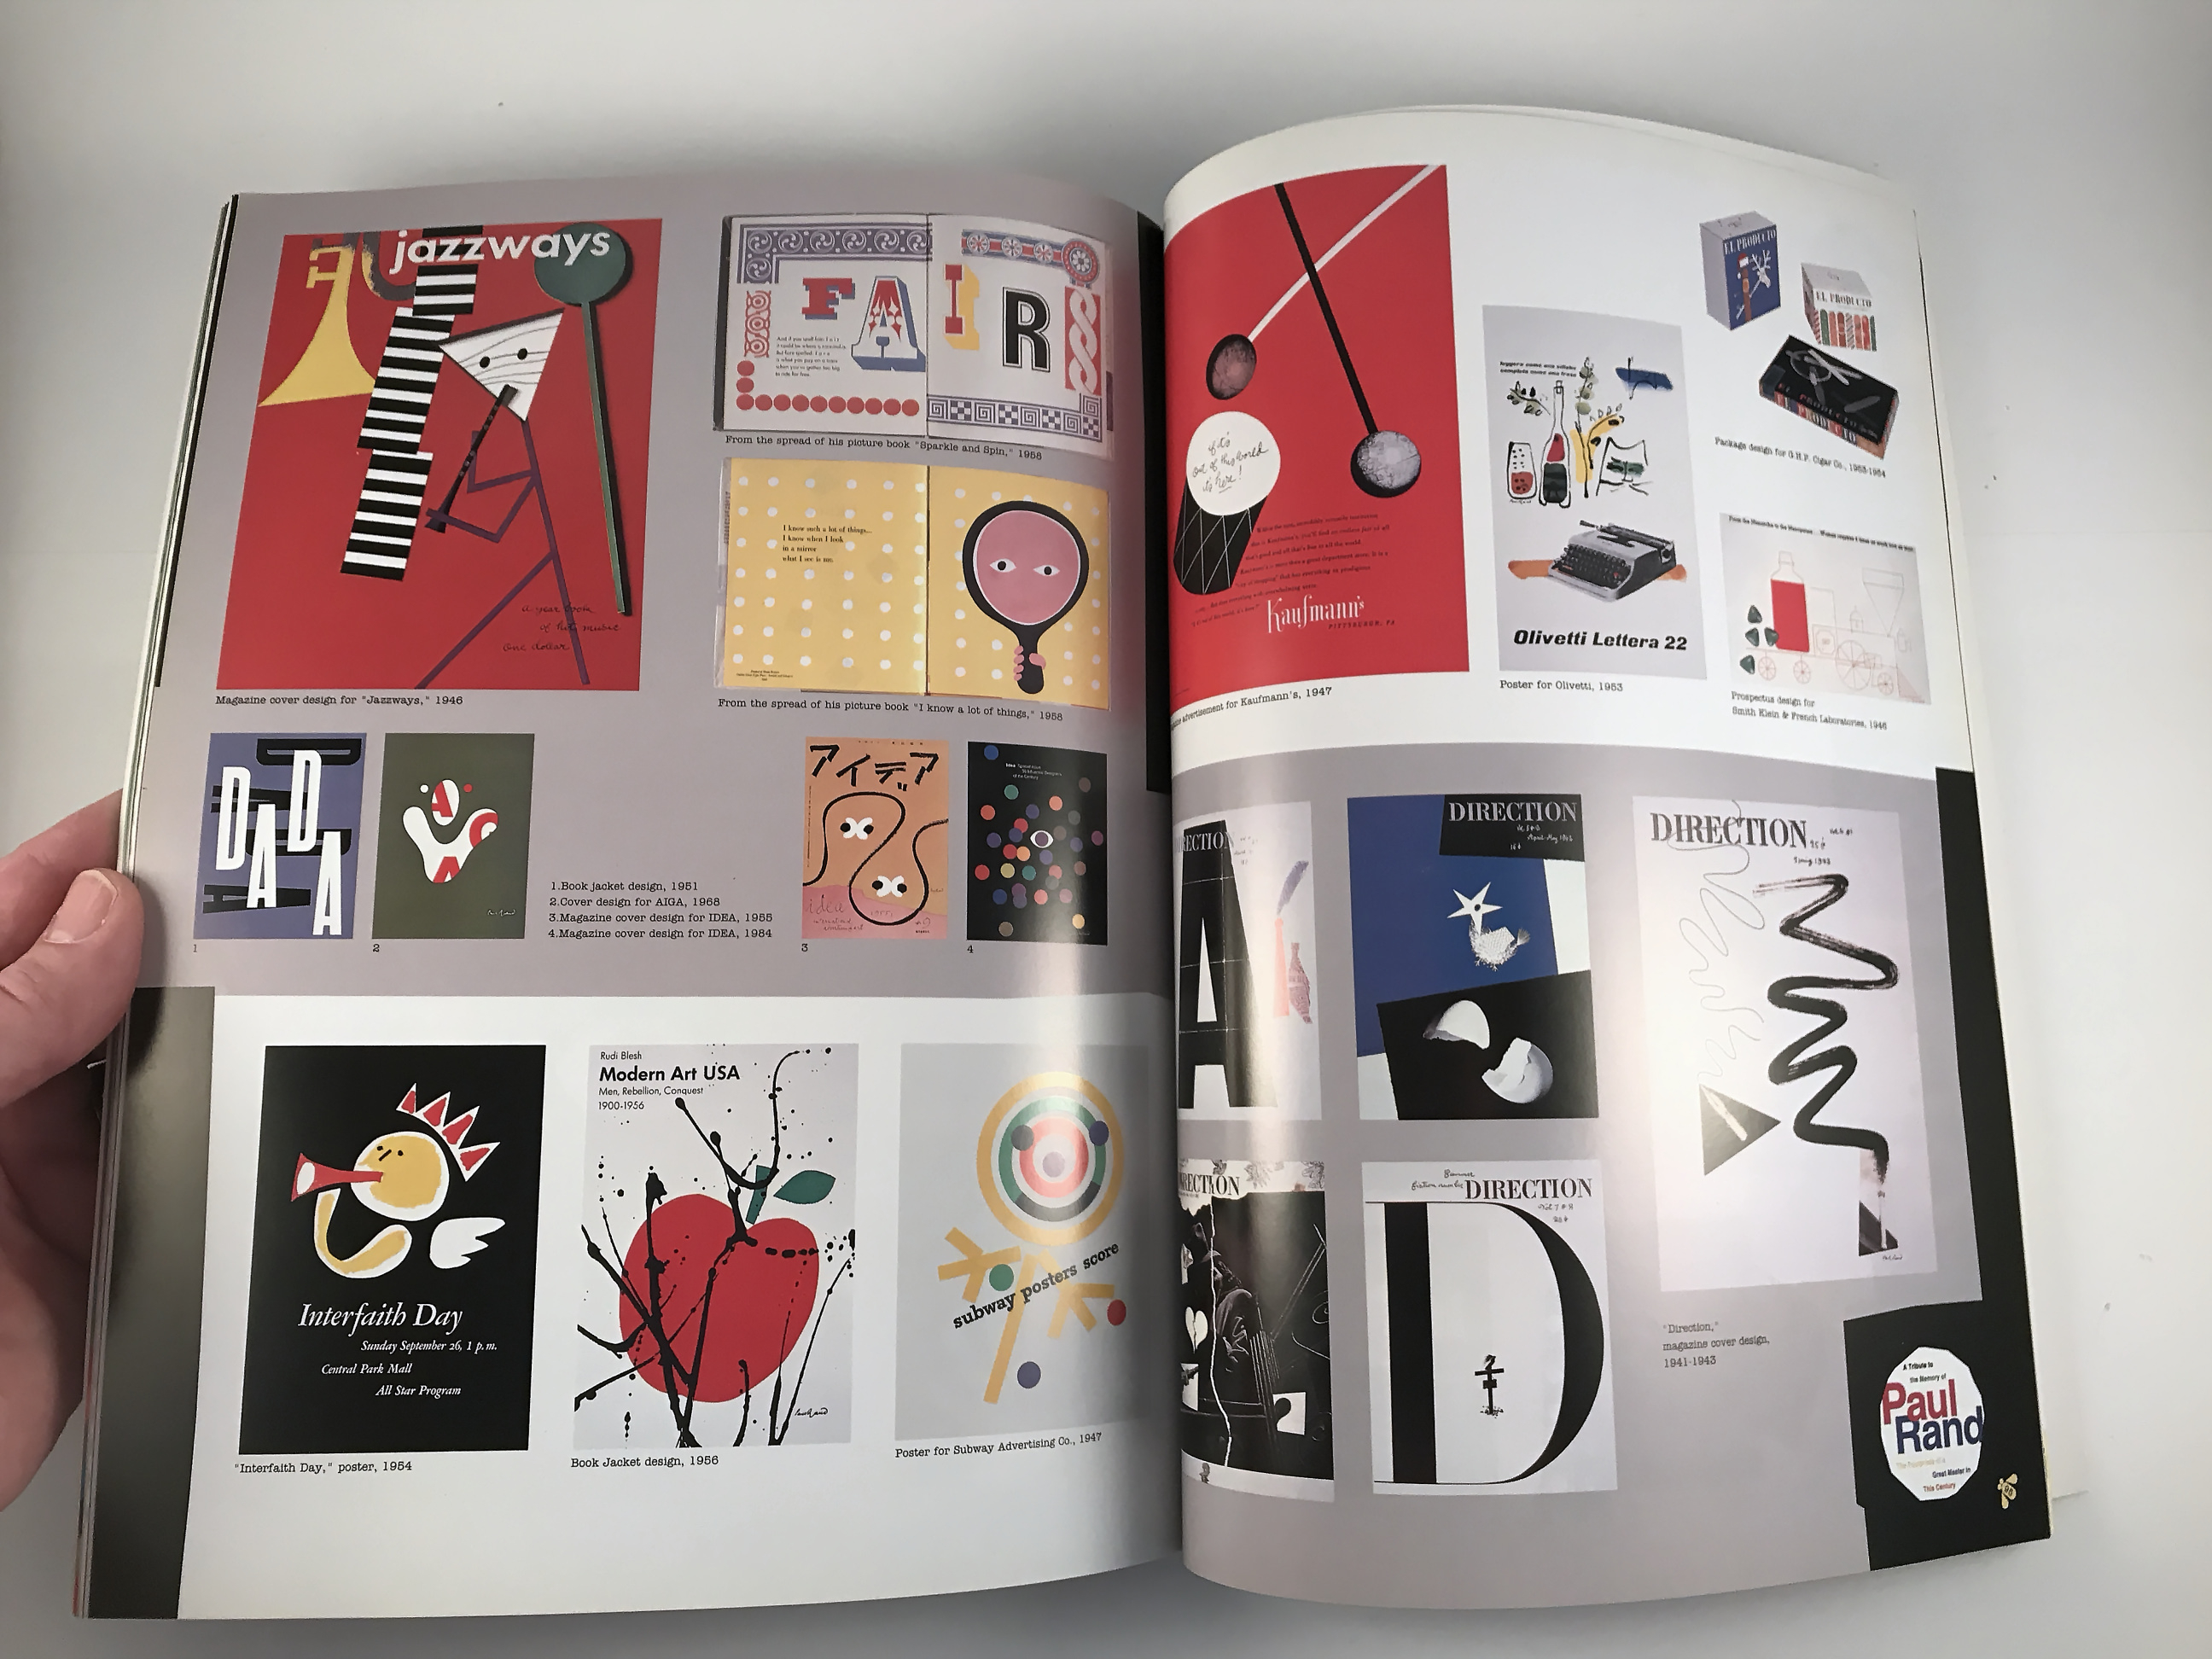 A Tribute to the Memory of Paul Rand | Paul Rand: Modernist Master 